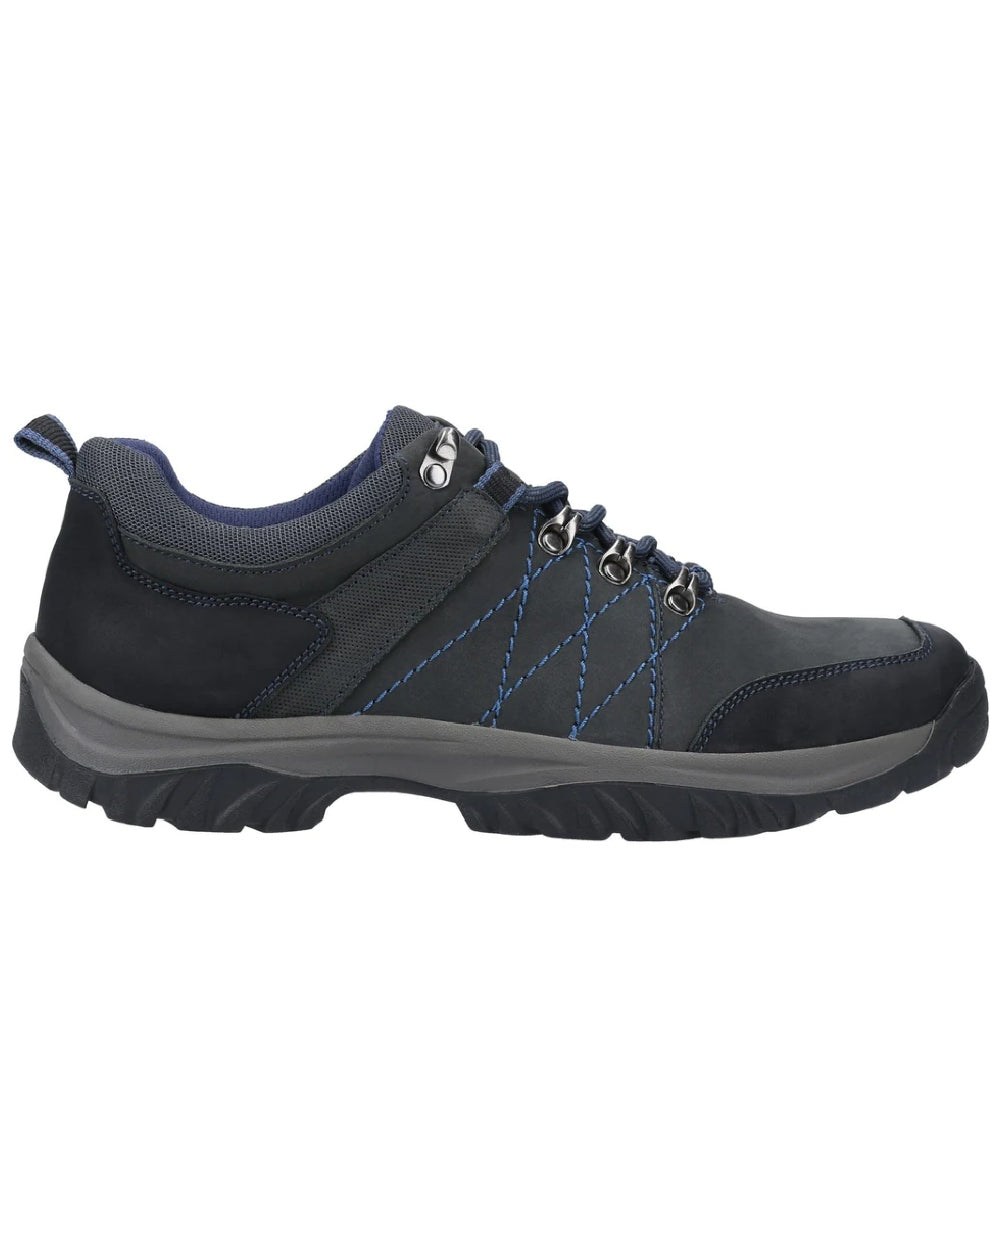 Navy coloured Cotswold Toddington Hiking Shoes on white background 